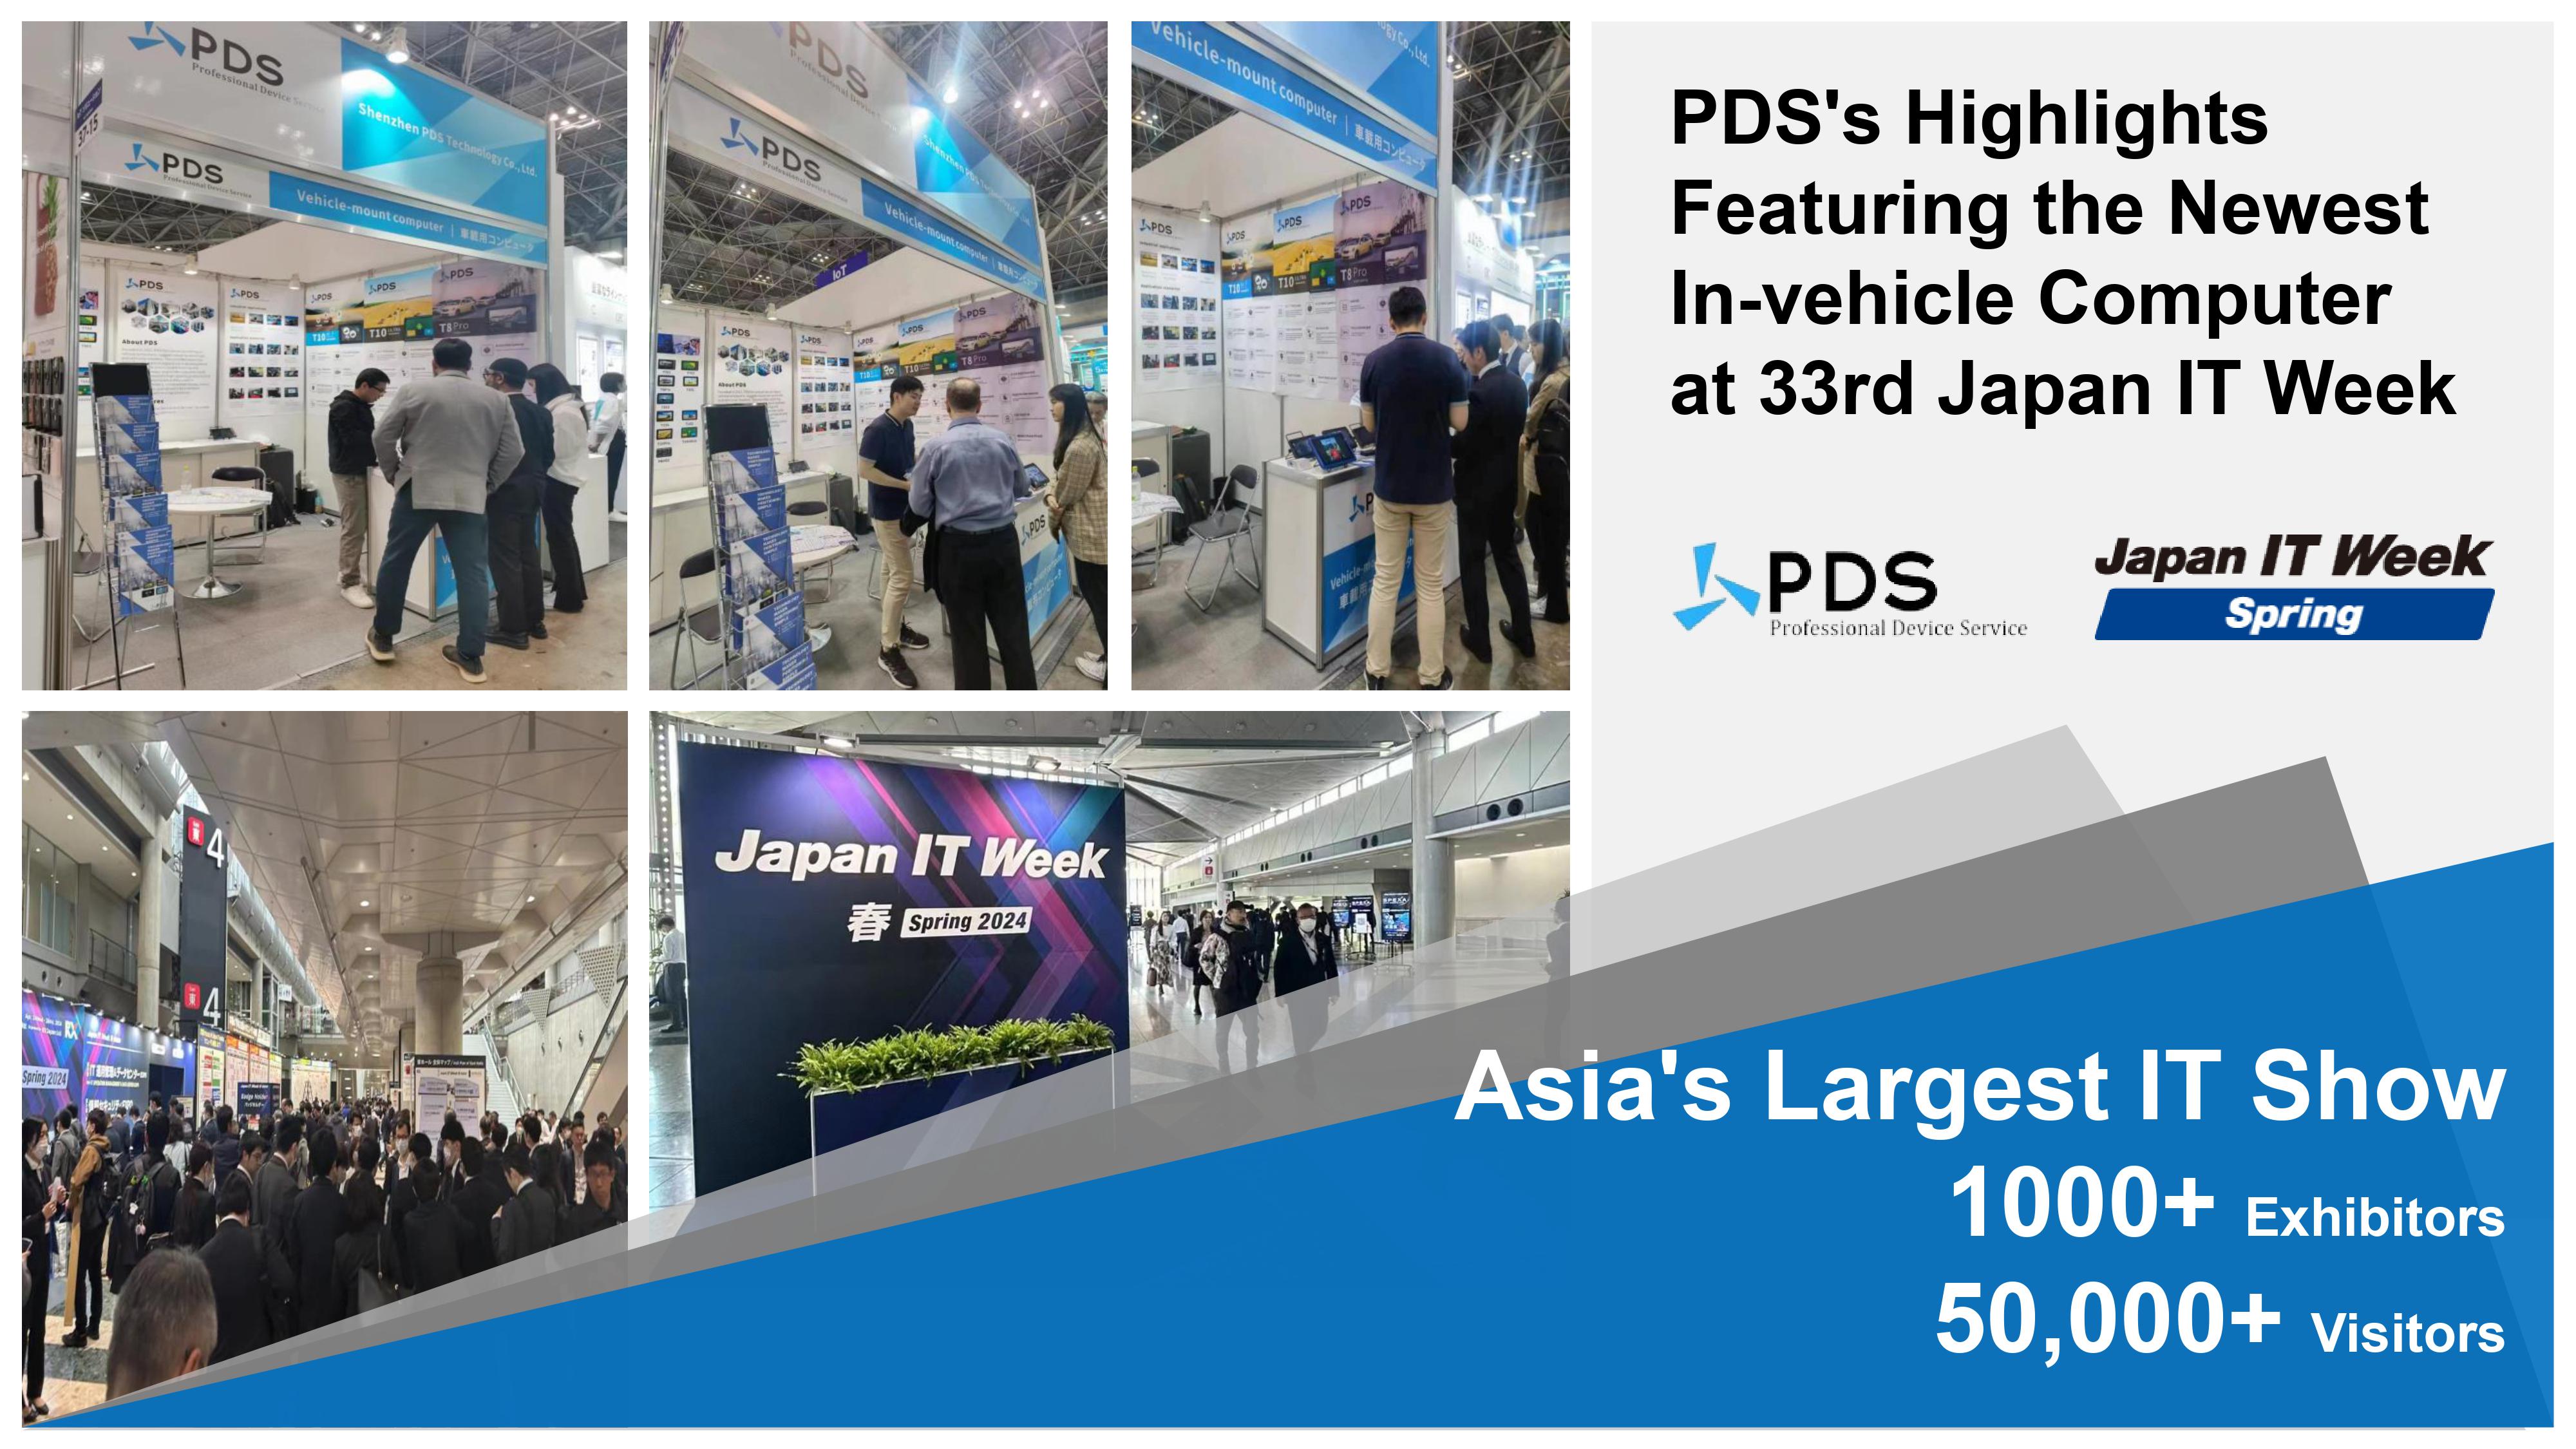 pdss-highlights-featuring-the-newest-in-vehicle-computer-at-the-33rd-japan-it-week.jpg